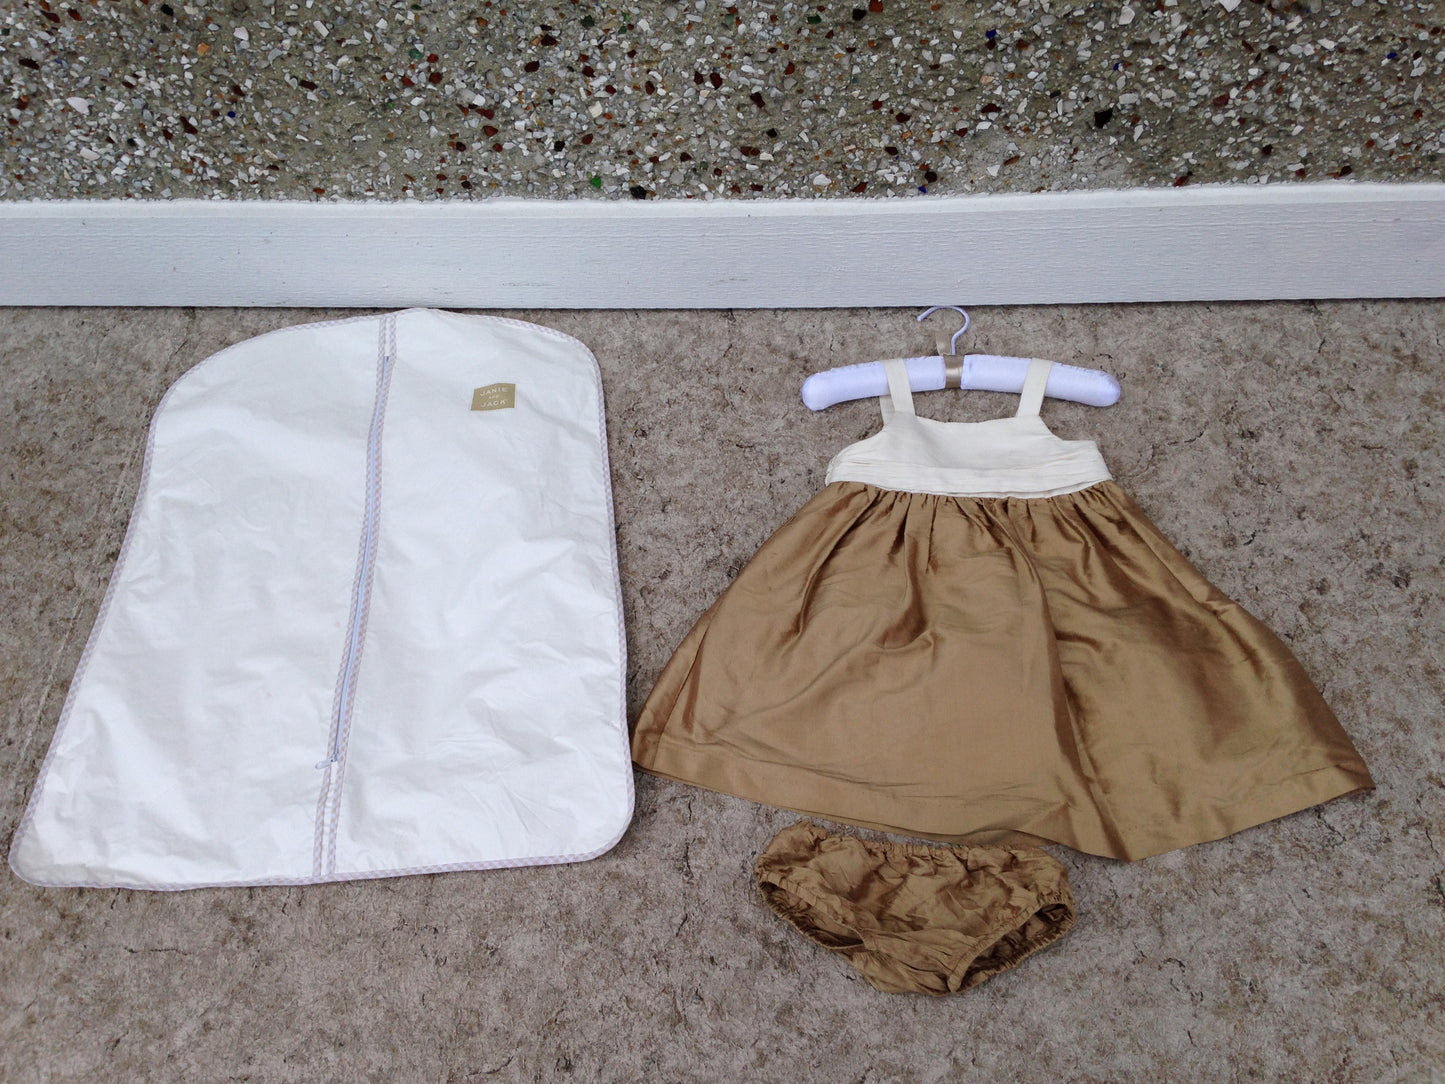 Dress Child Size 12-18 Month Desiigner Jane and Jack Satin With Panties and Dress Bag